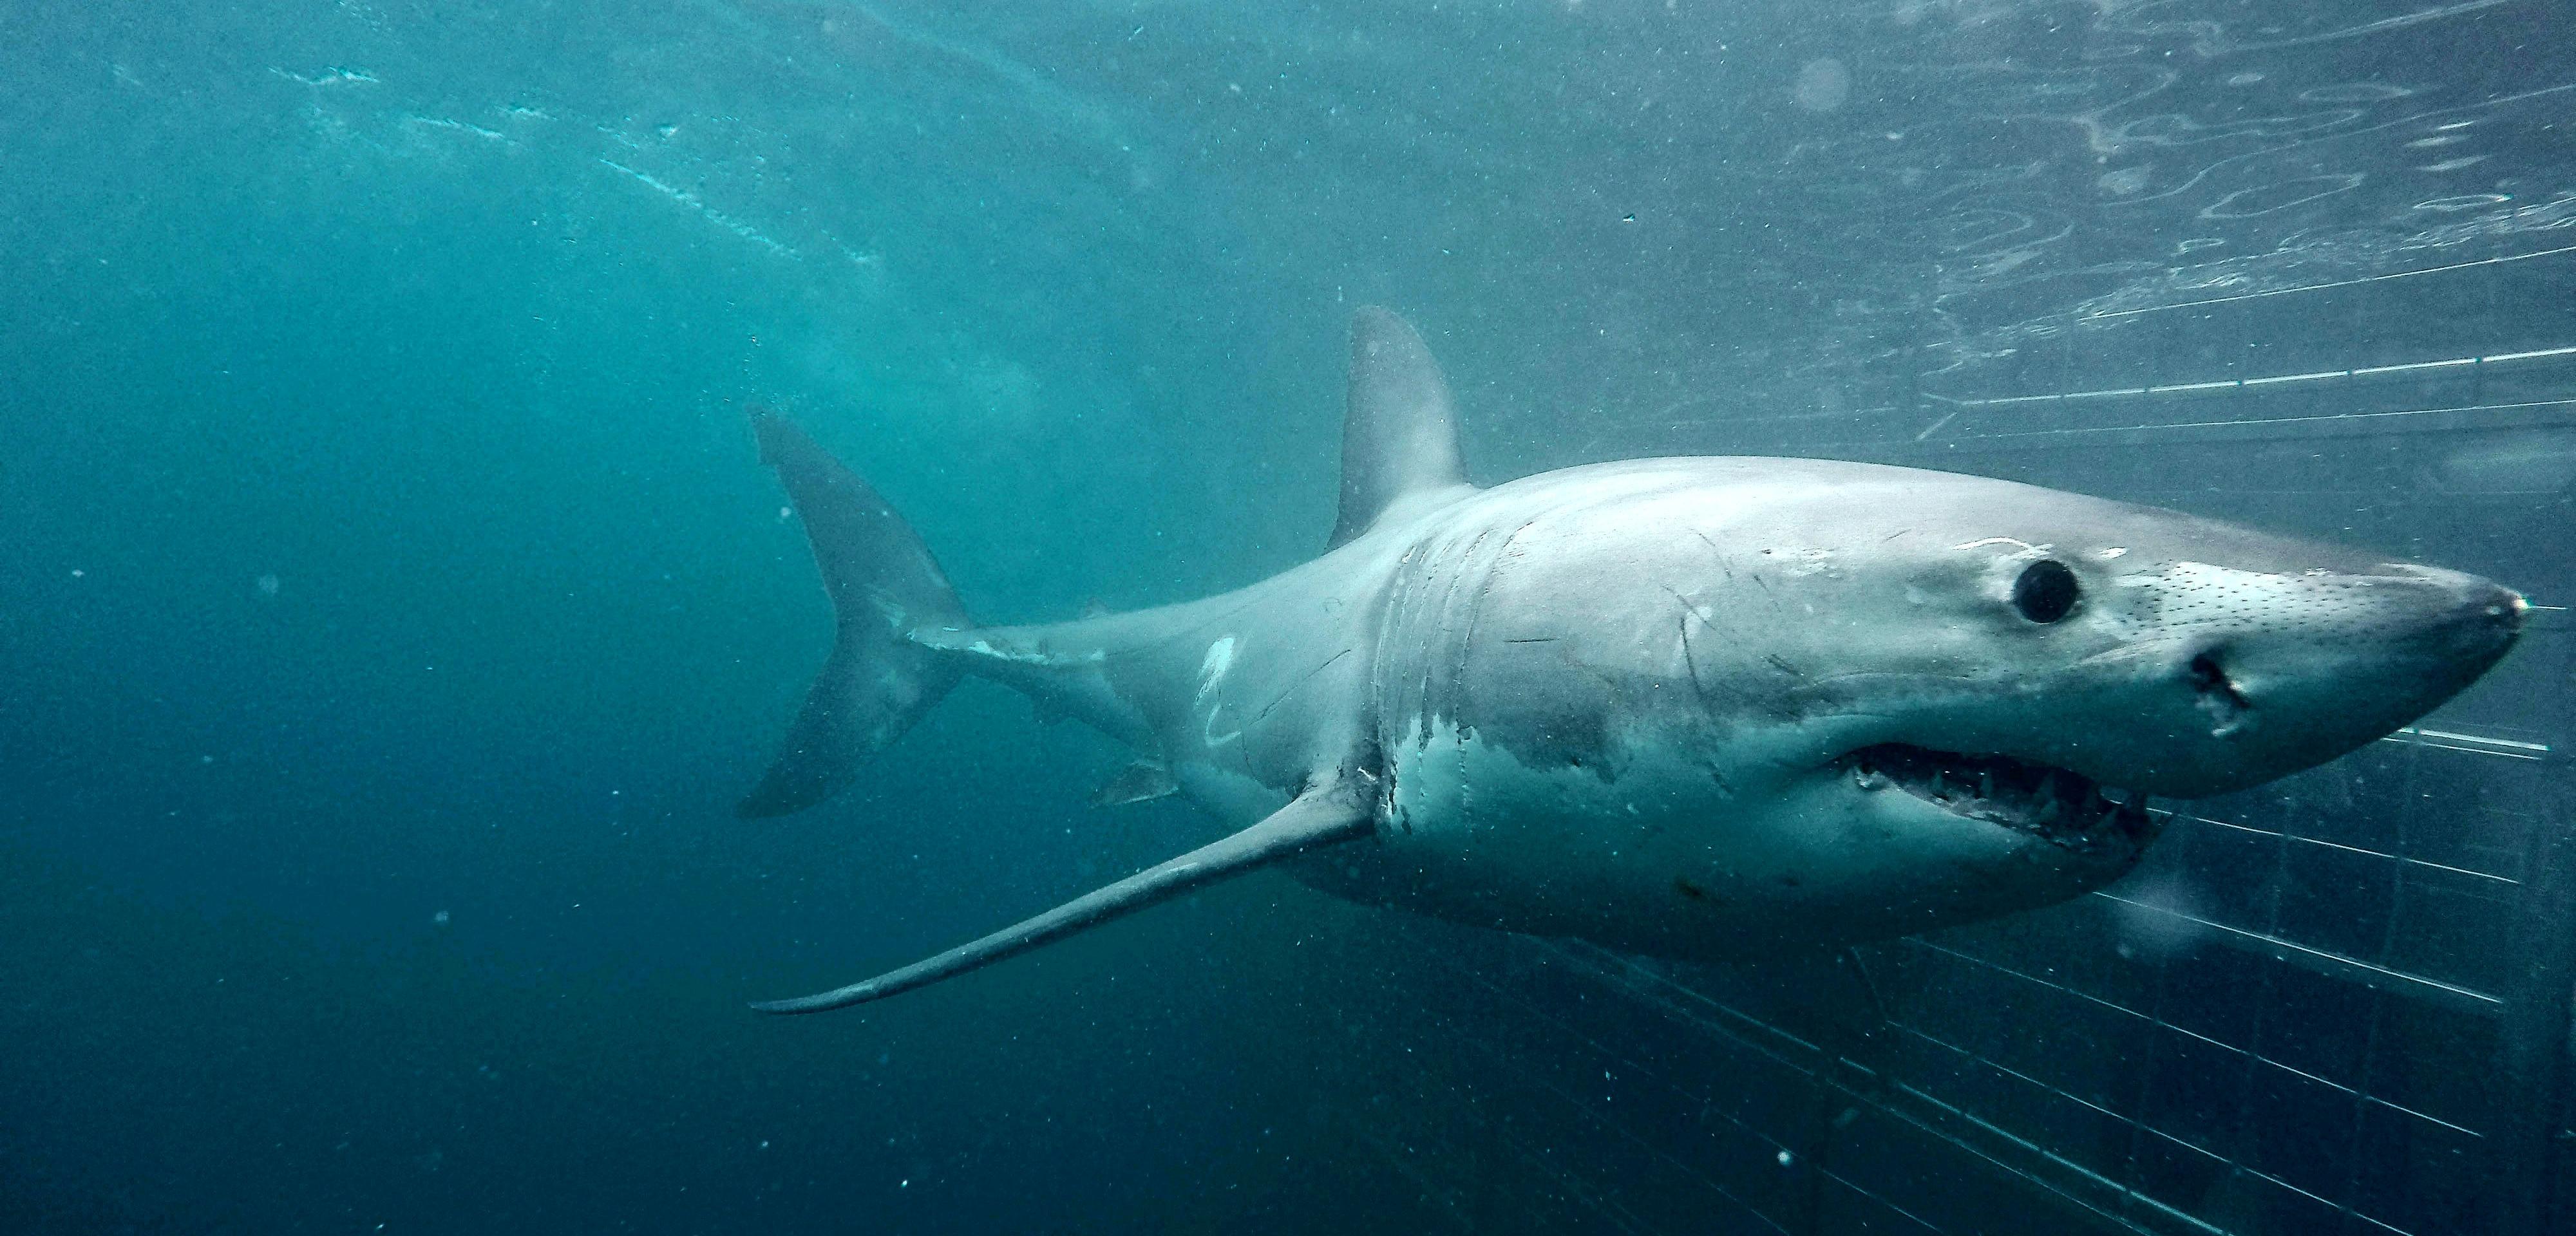 Cage Diving with Great White Sharks – In Gansbaai (2 hours from Cape Town)